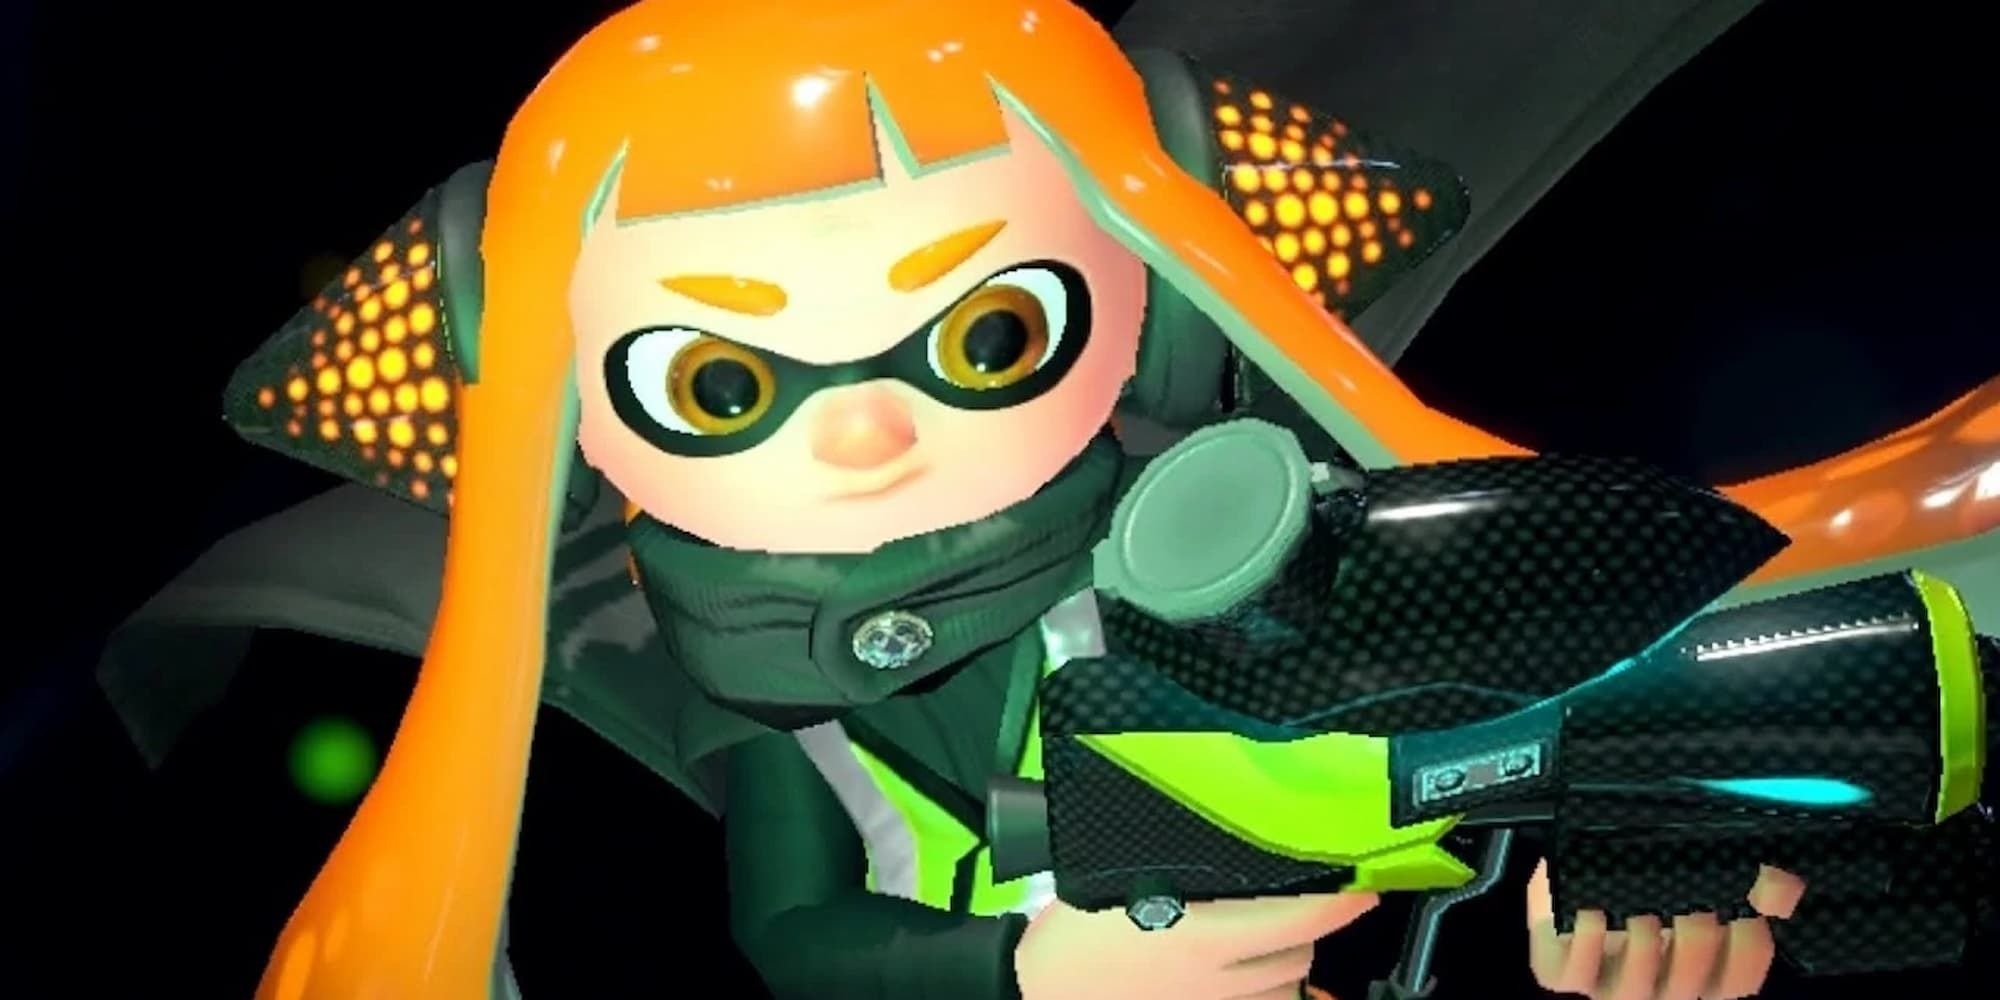 Agent 3 from Splatoon delivers a fierce look as she holds her paint gun.